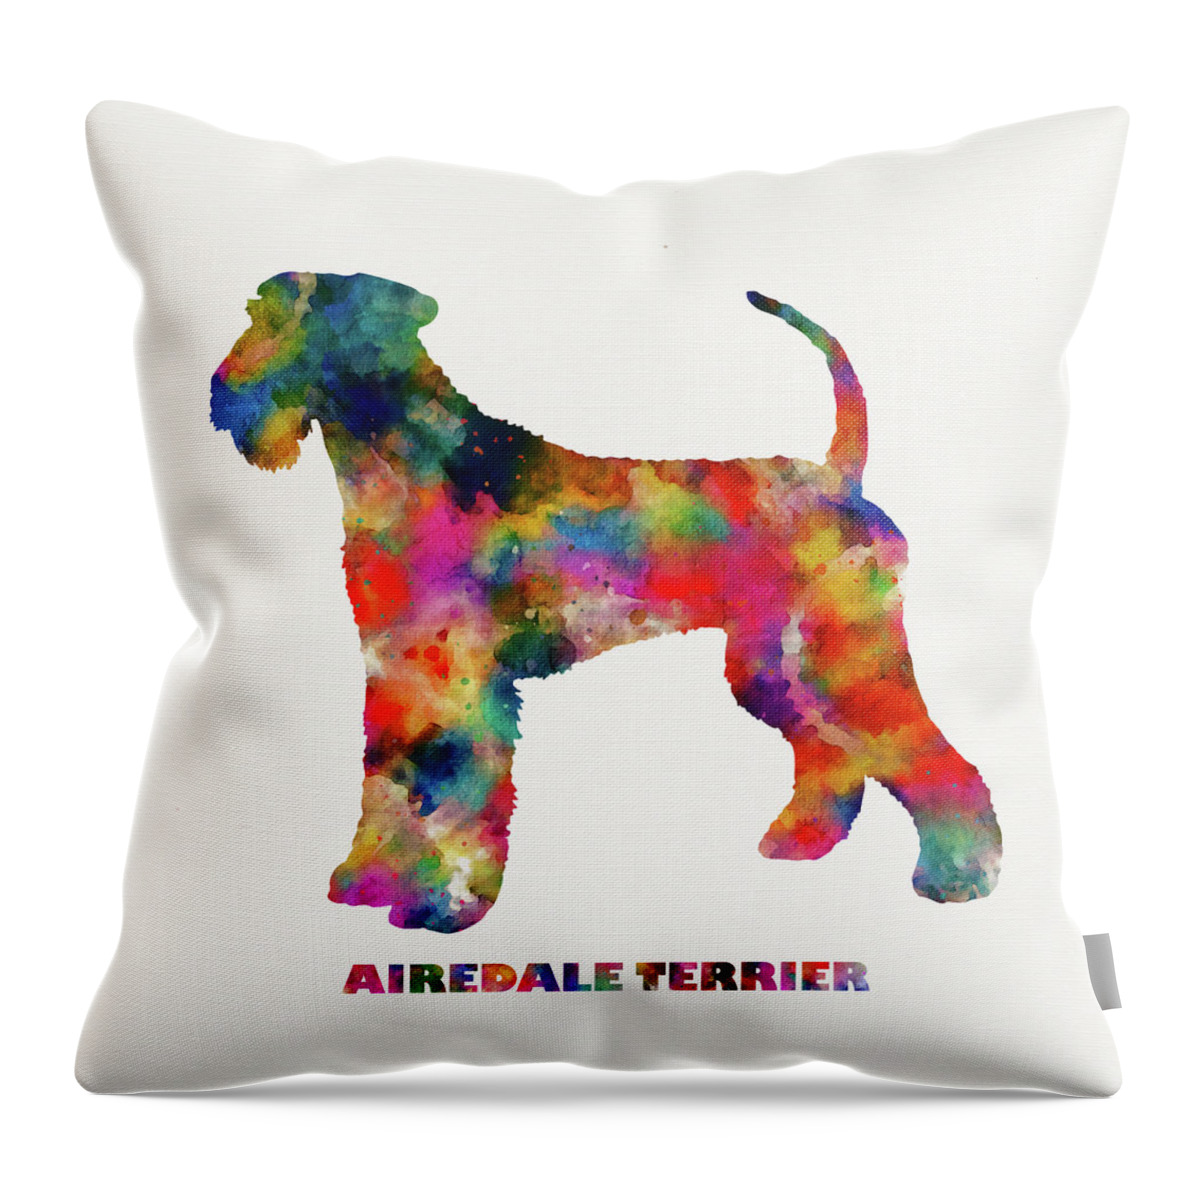 Airedale Terriers Throw Pillow featuring the digital art Tie Dye Airdale Terrier Art by Peggy Collins